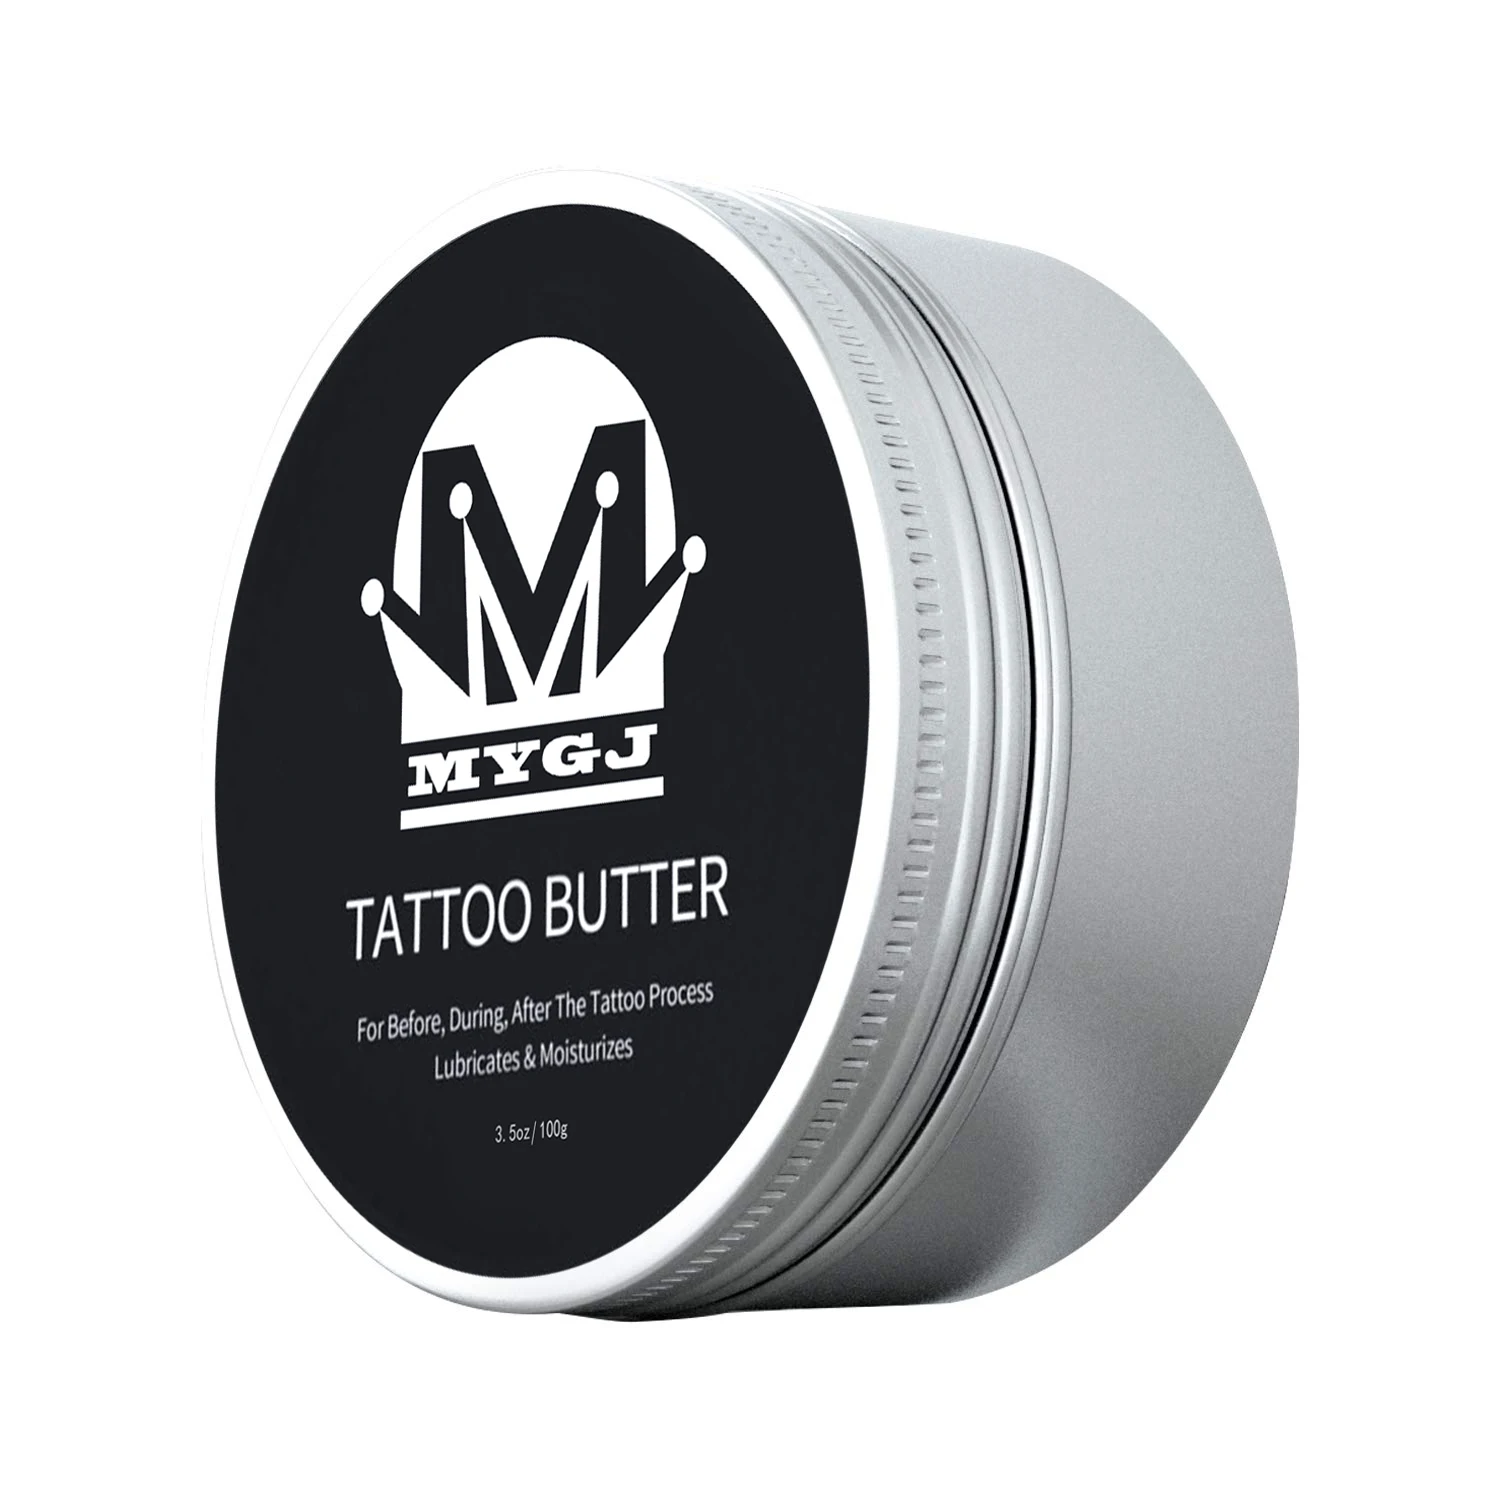 

XIOU Private label Tattoo Balm tattoo aftercare cream for After,Brightener & Moisturizing Ointment